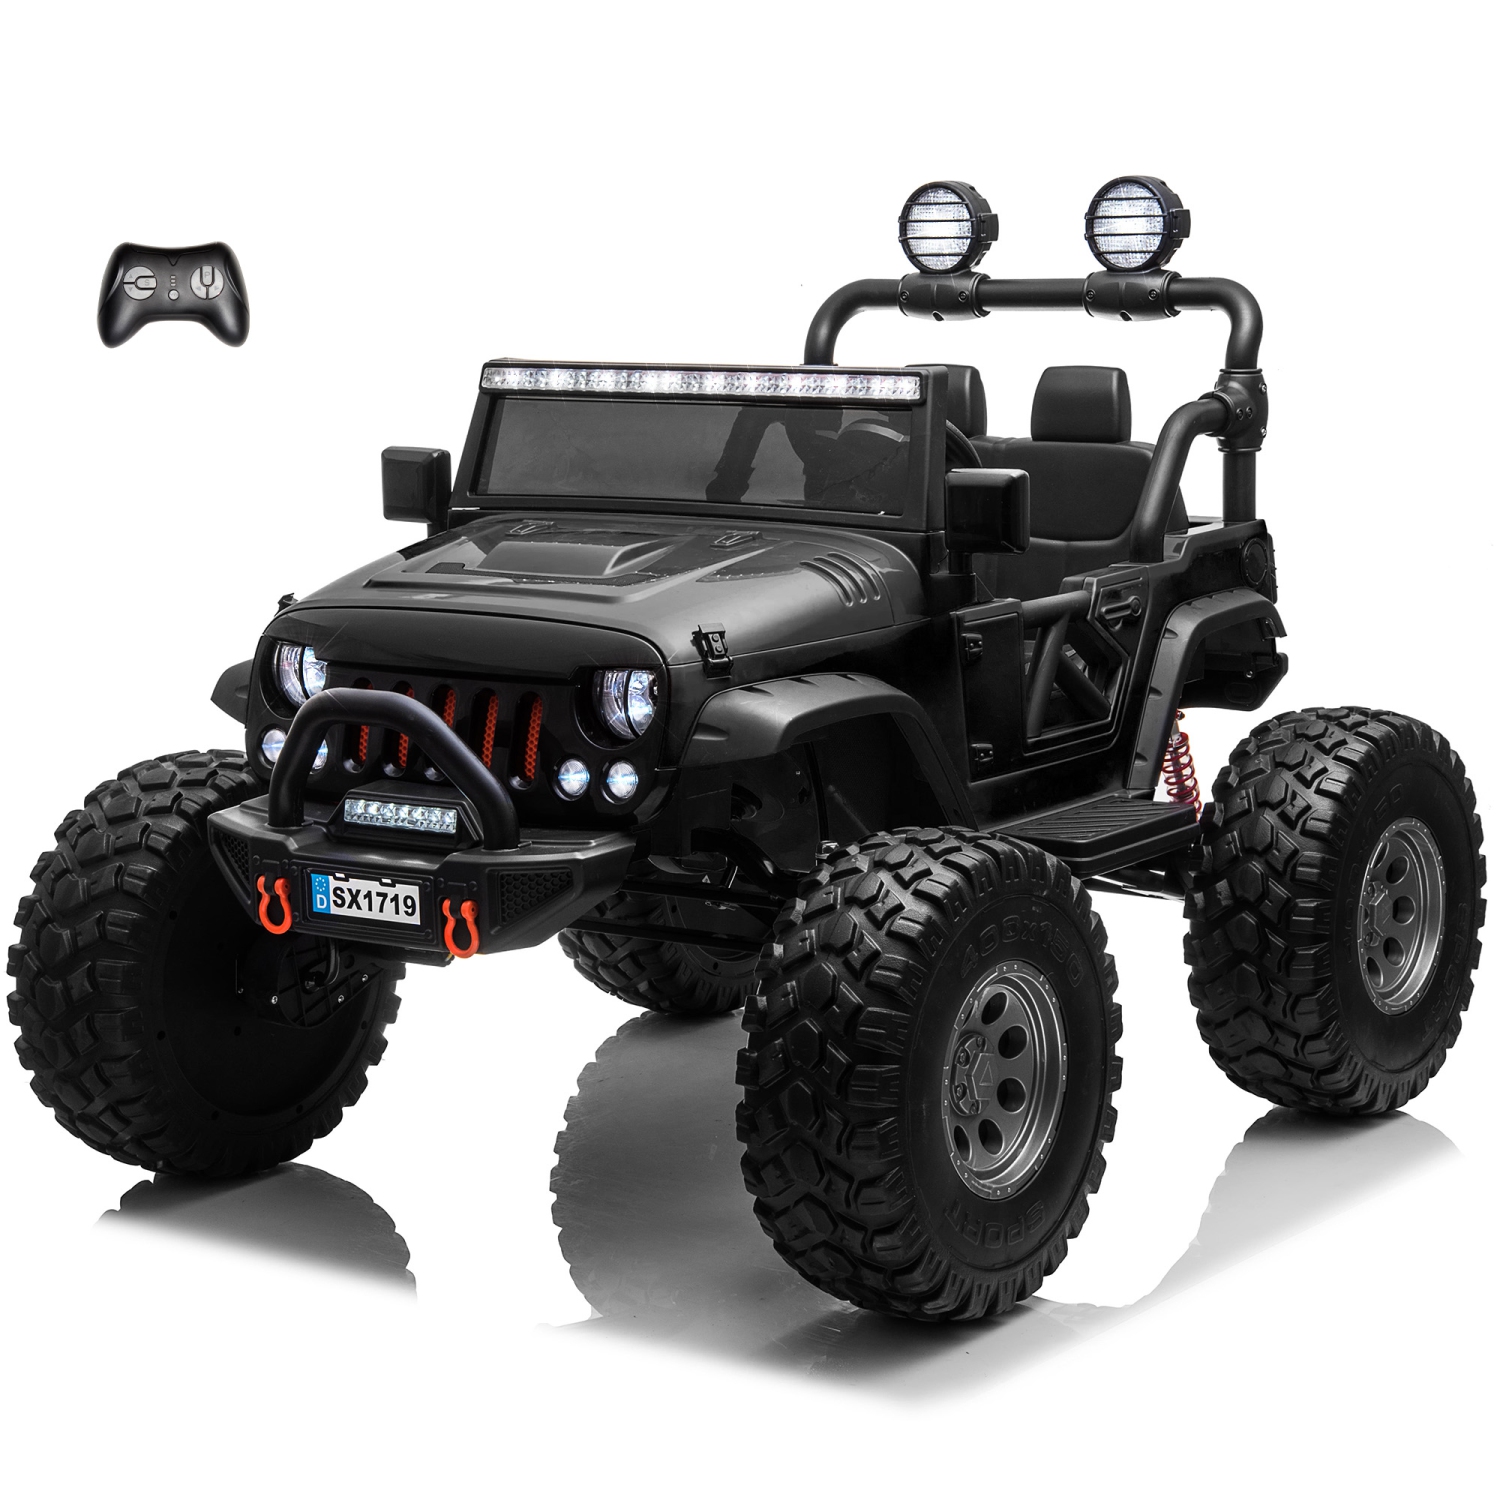 VOLTZ TOYS 2 Seater Ride on Car, 24V Lifted Monster Jeep Electric Car for Kids, Battery Powered Ride-on Truck with Leather Seat, Remote Control, LED Lights and MP3 Player